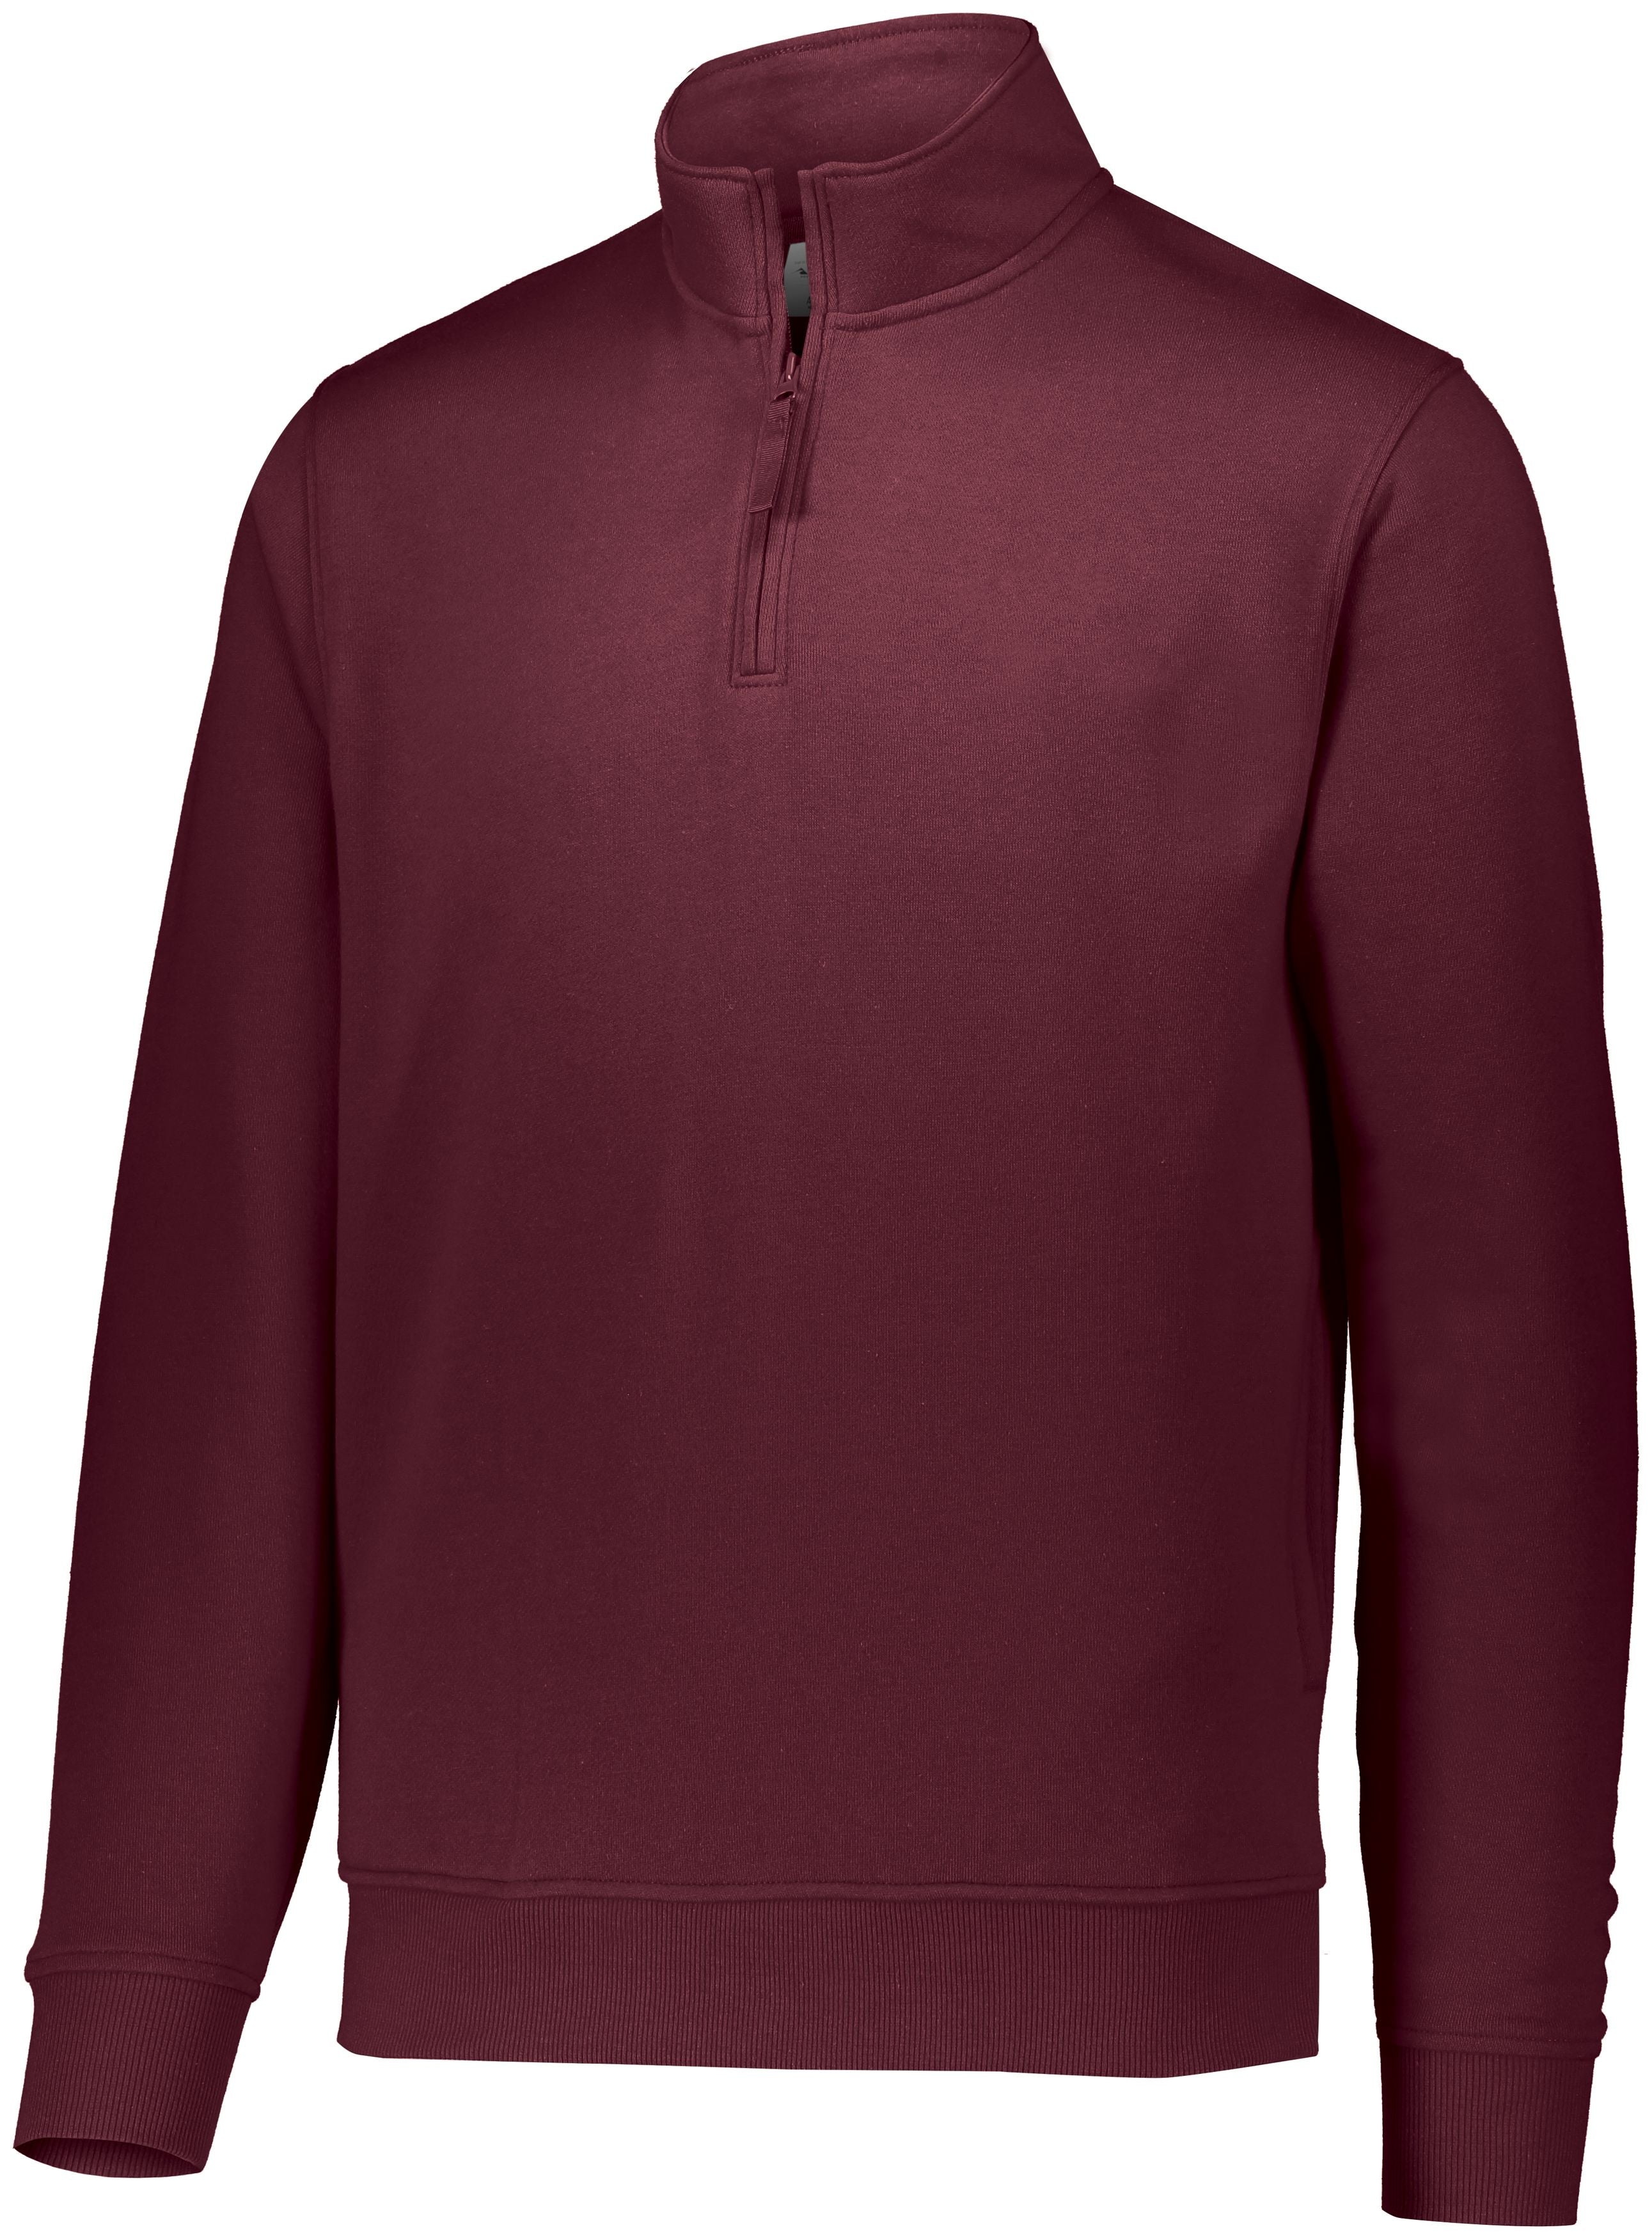 Augusta Sportswear 60/40 Fleece Pullover in Maroon  -Part of the Adult, Adult-Pullover, Augusta-Products, Outerwear product lines at KanaleyCreations.com